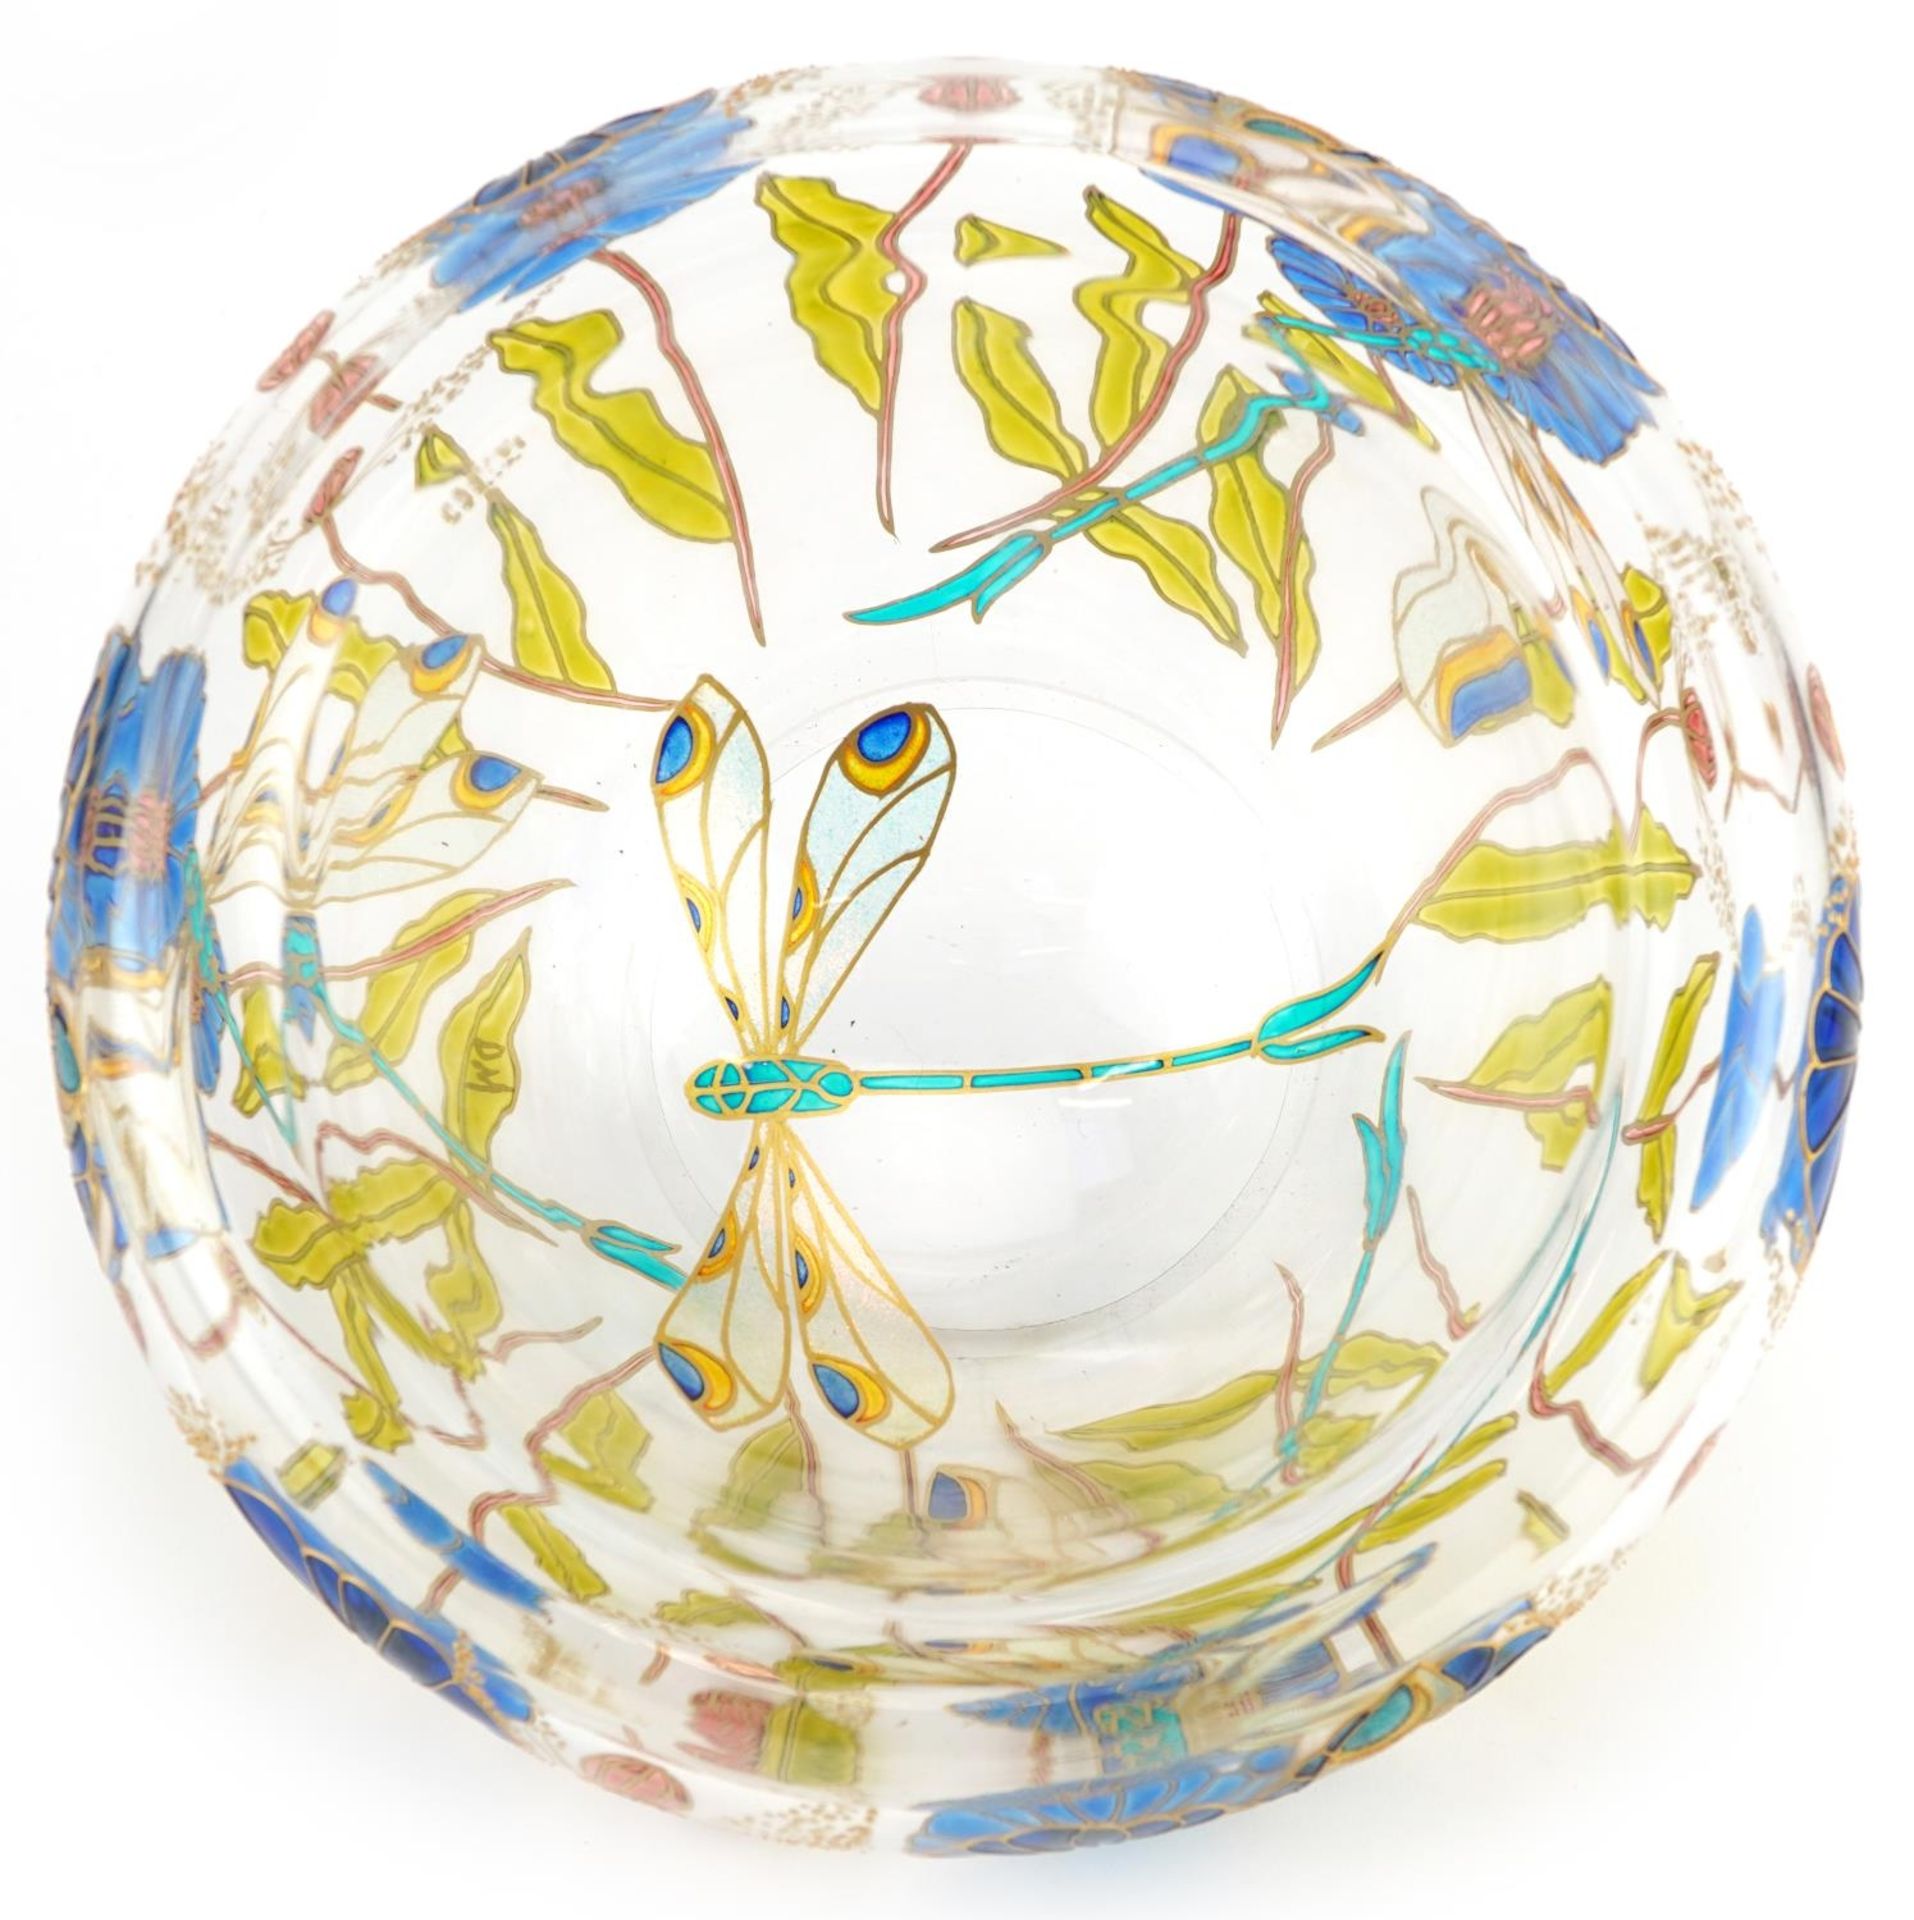 Double walled art glass bowl hand painted with dragonflies amongst flowers, 25.5cm in diameter - Bild 3 aus 5